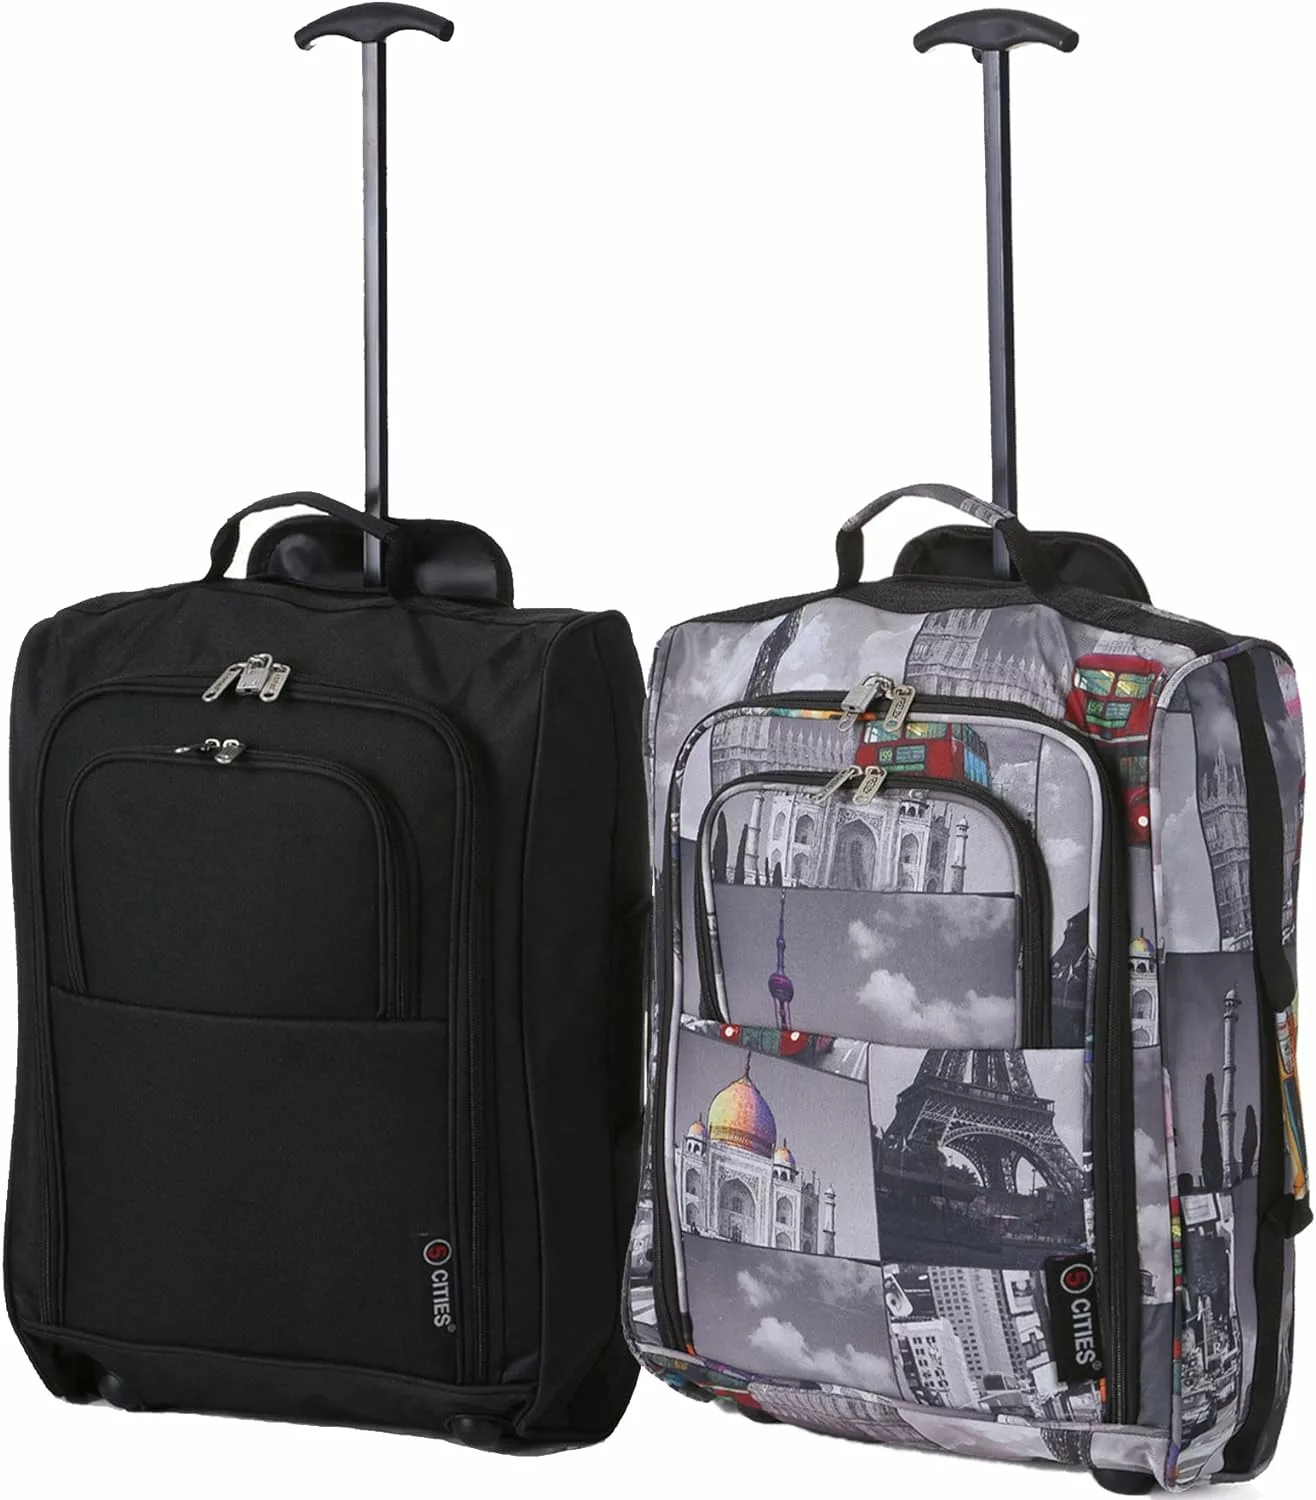 5 Cities Set of 2 Super Lightweight Cabin Approved Luggage Travel Wheely Suitcase Wheeled Bags